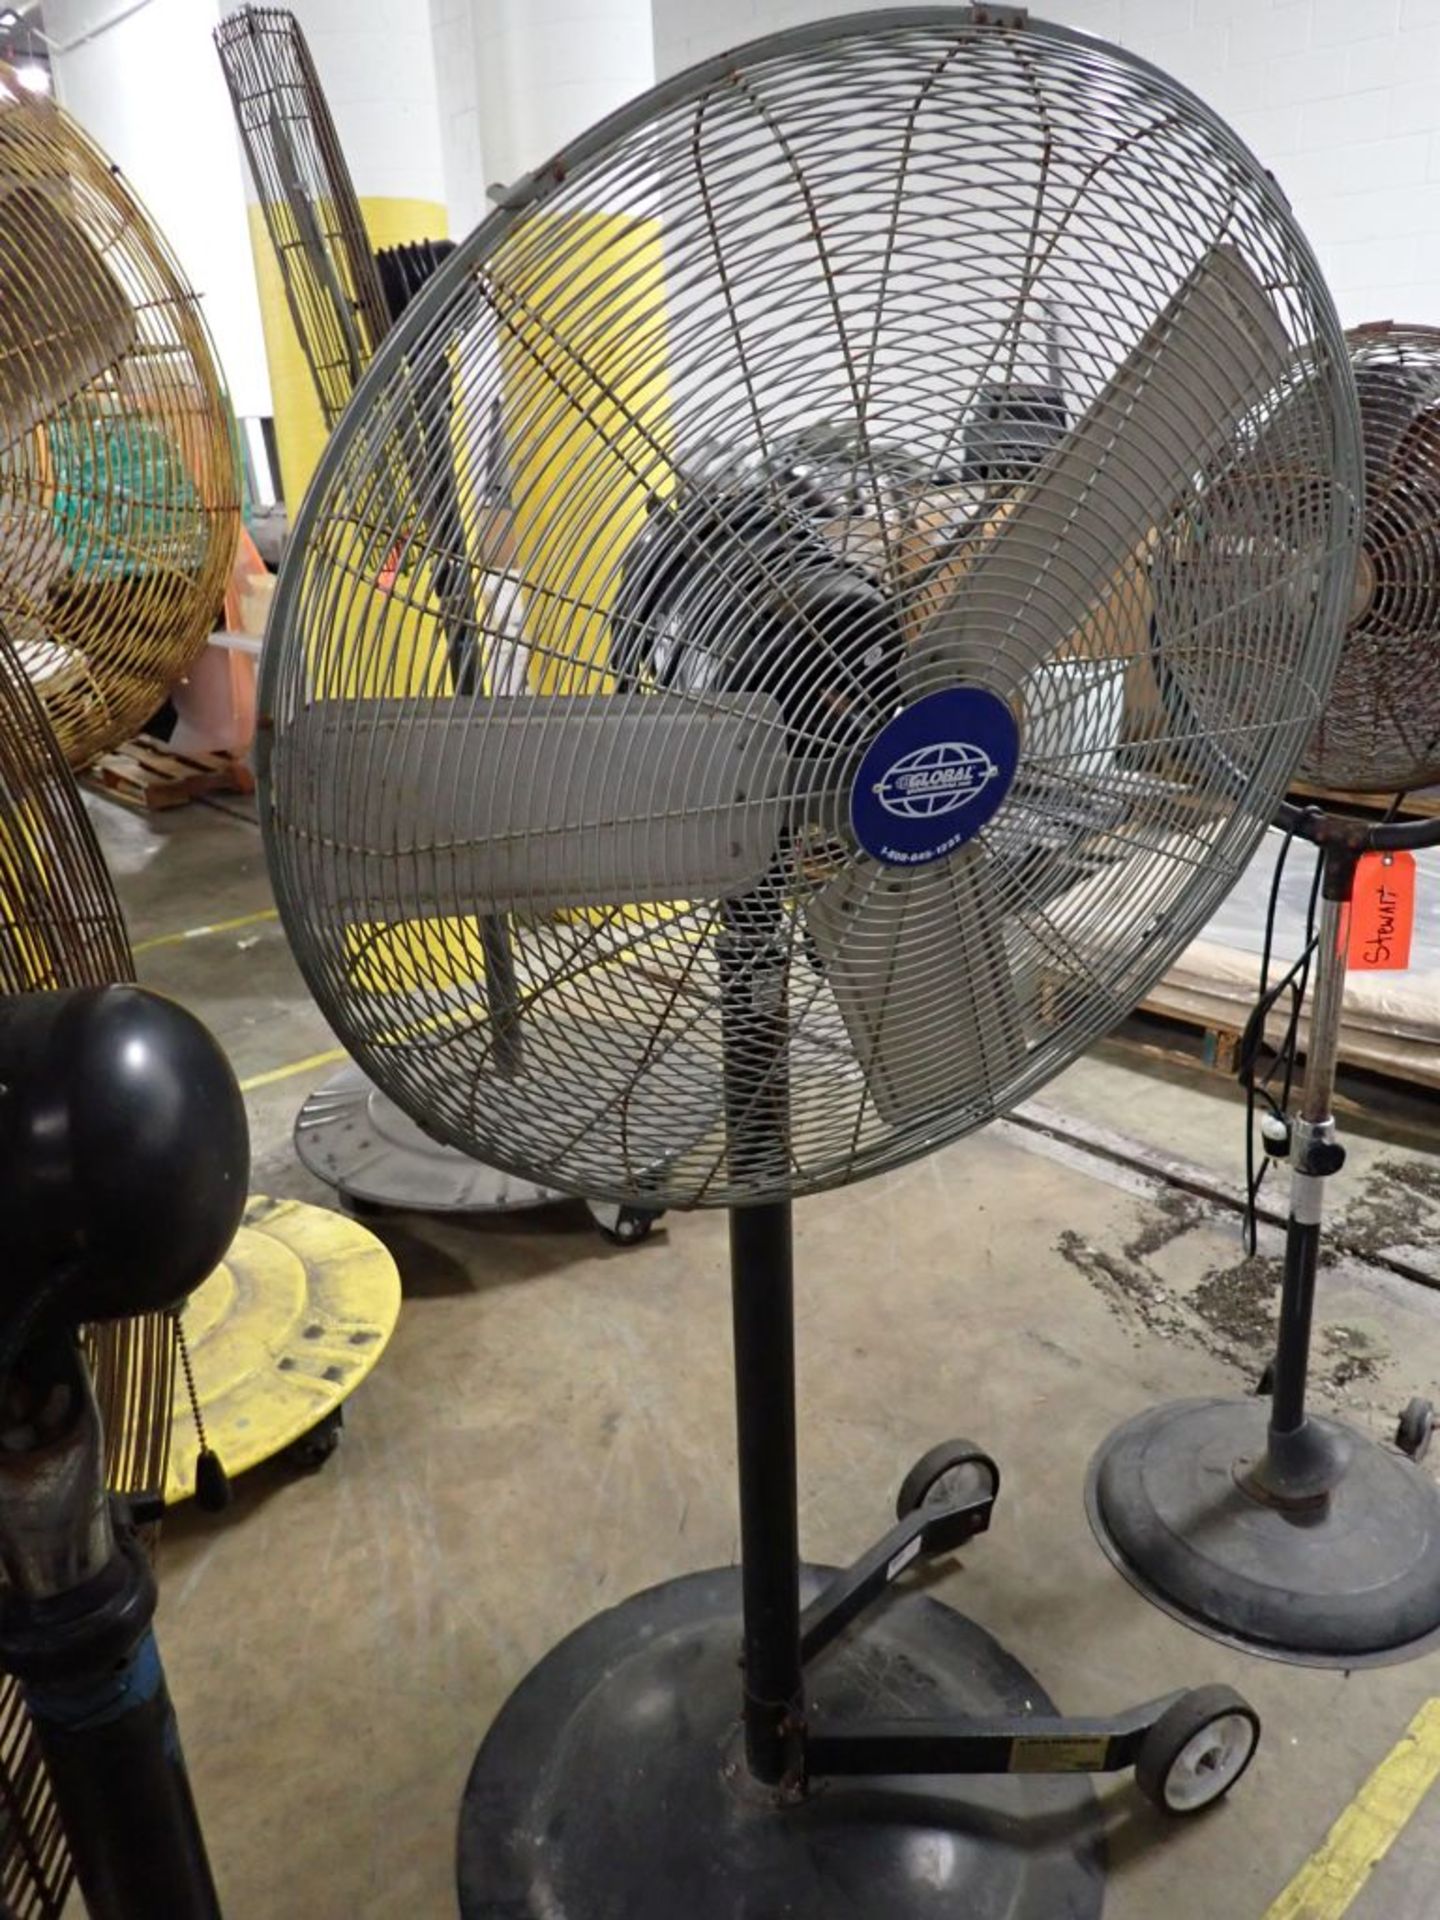 Lot of (3) Fans | Tag: 241667 | Limited Forklift Assistance Available - $10.00 Lot Loading Fee - Image 3 of 7